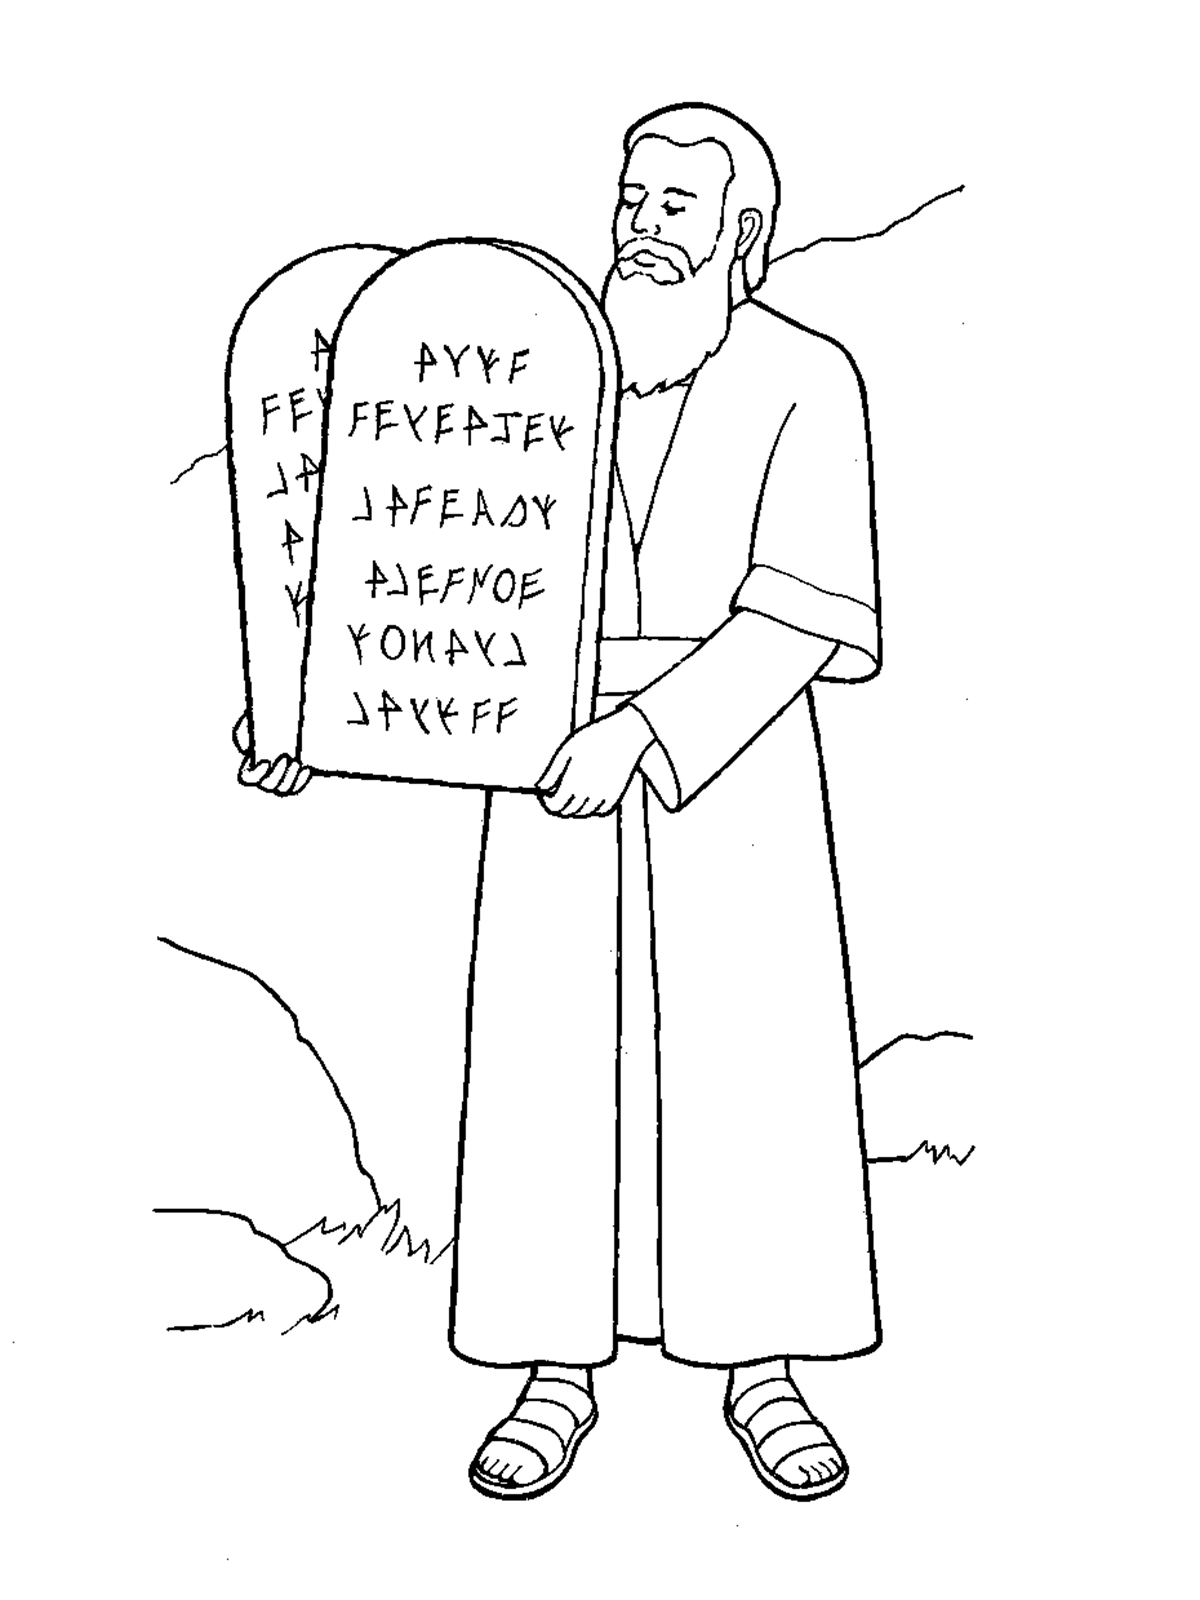 moses rh lds org LDS Priesthood Coloring Pages LDS Coloring Pages Scripture